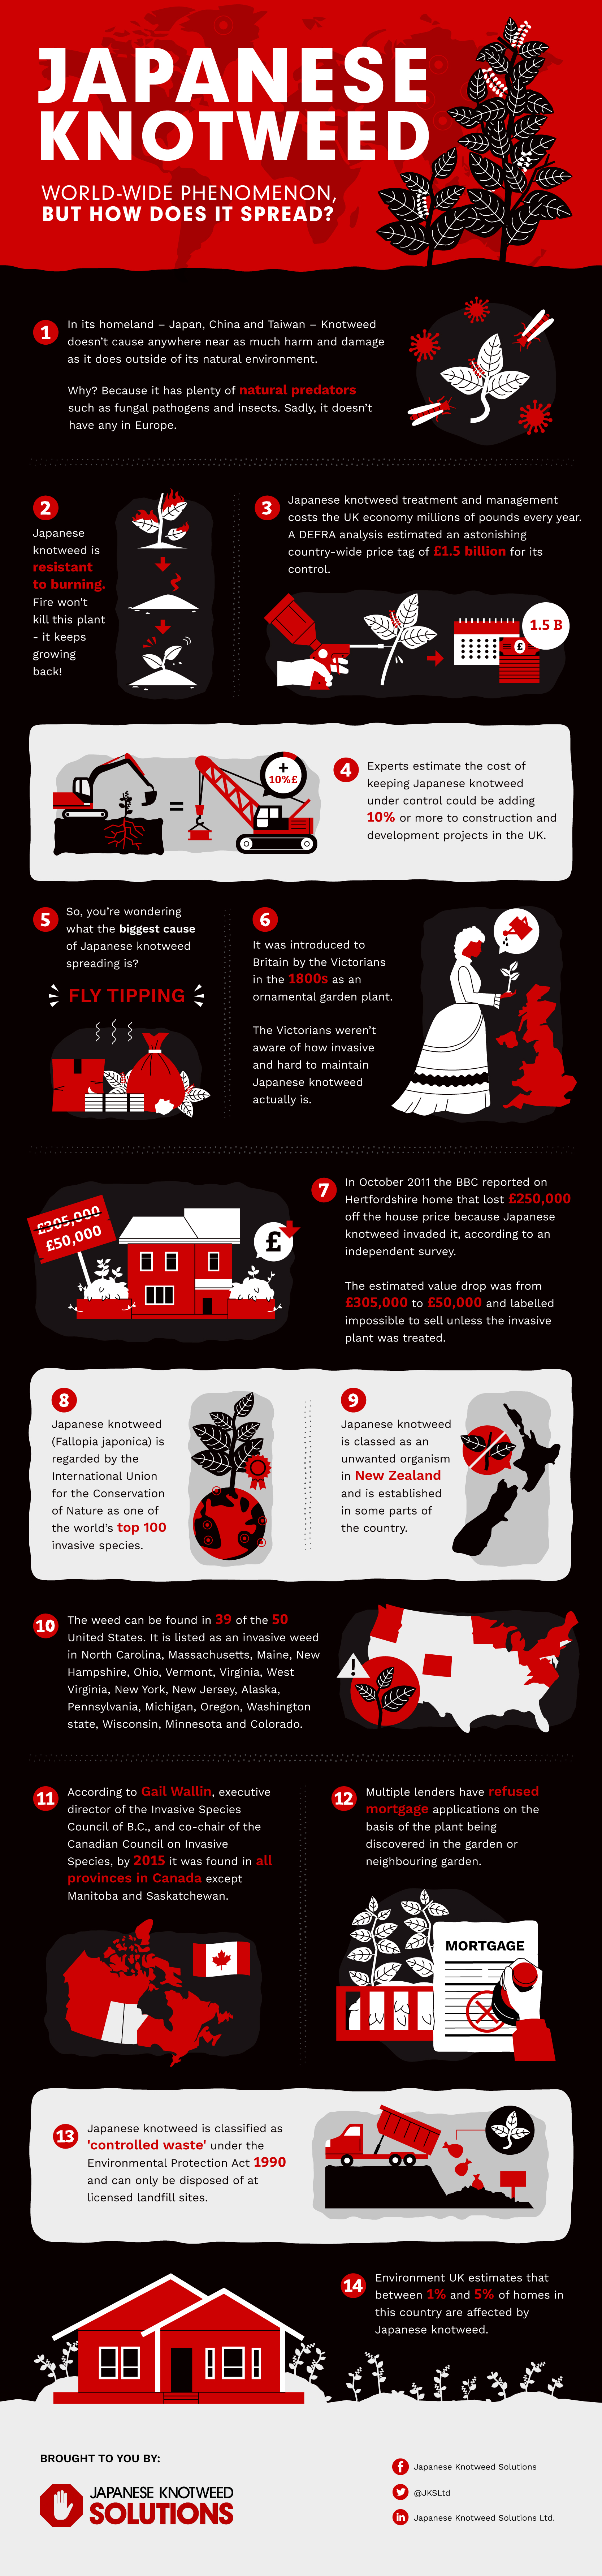 Infographic for Japanese Knotweed